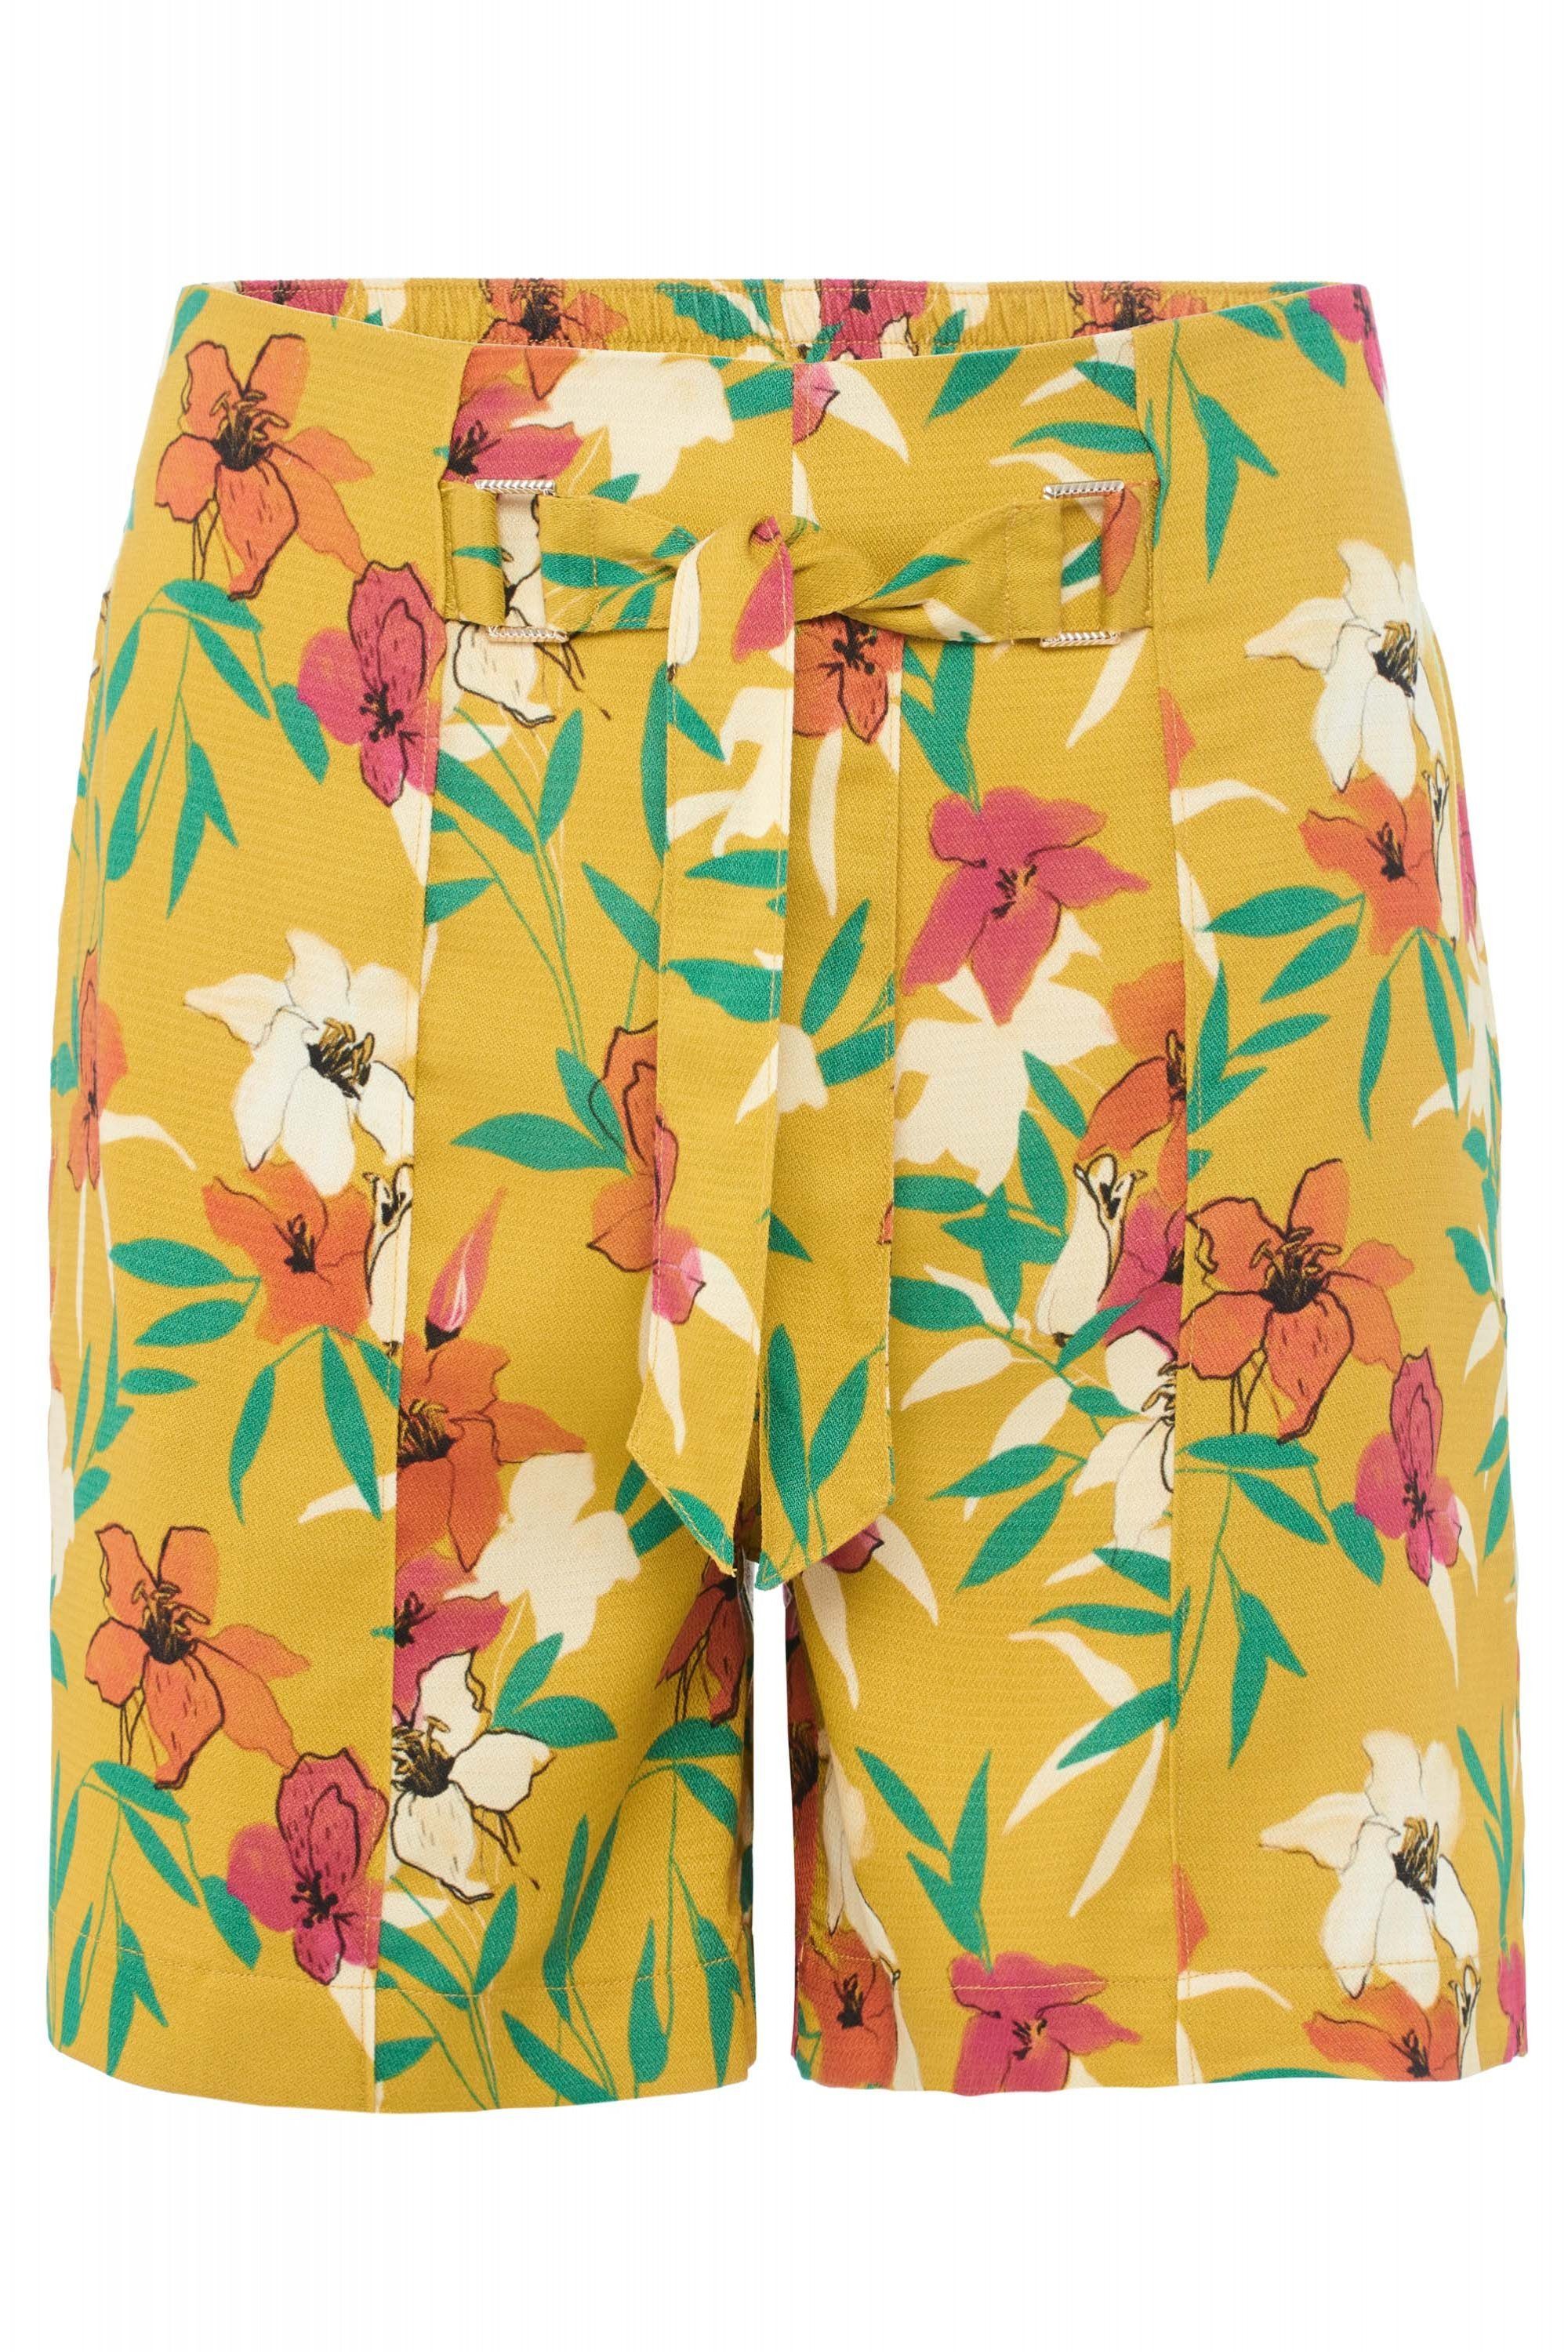 Salsa Stretch-Jeans SALSA JEANS floral print SHORTS yellow 122813.4048